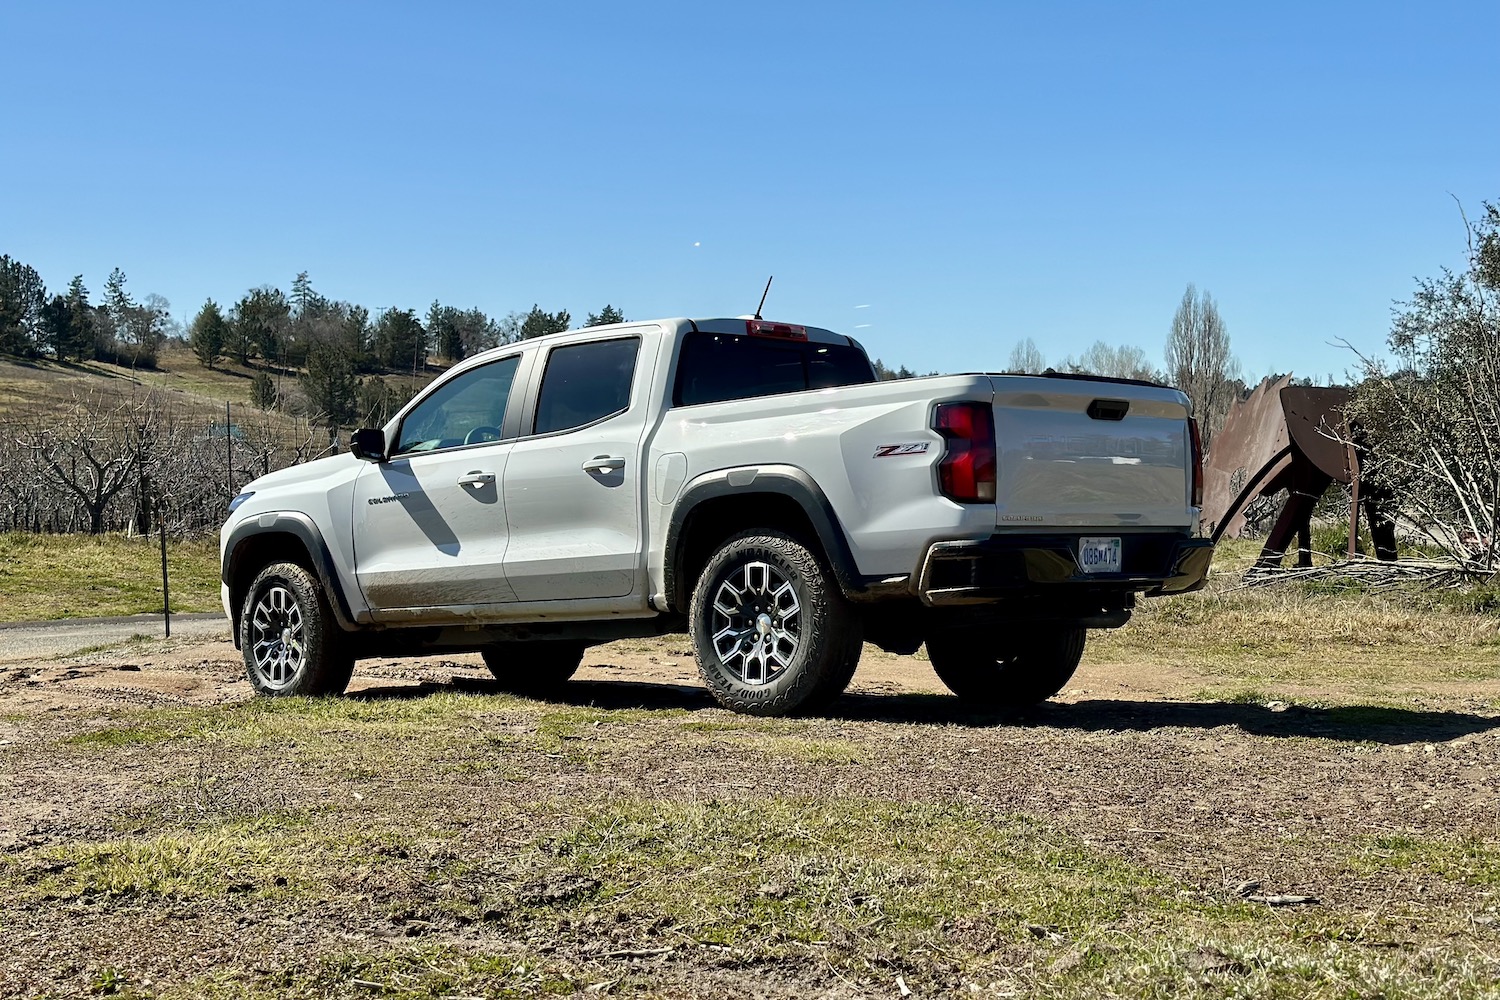 Rear end angle of the 2023 Chevrolet Colorado Z71 parked in a muddy field with trees in the back.